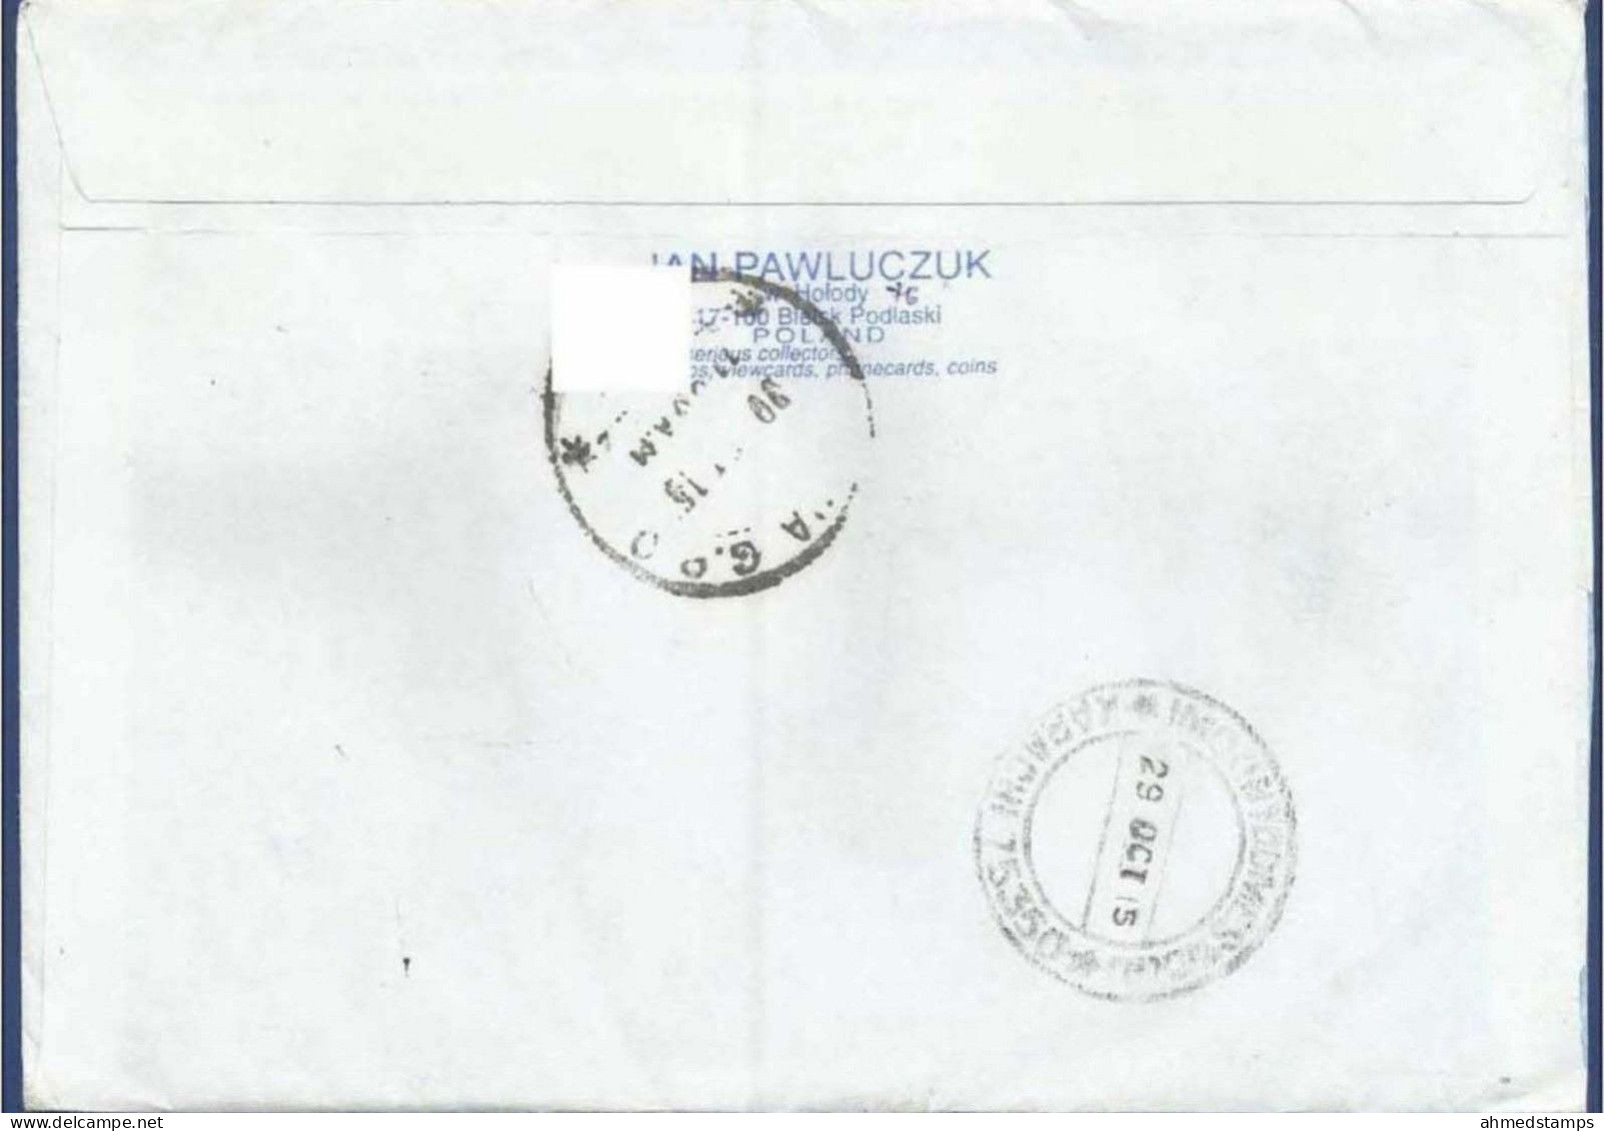 POLAND REGISTERED POSTAL USED AIRMAIL COVER TO PAKISTAN - Airplanes